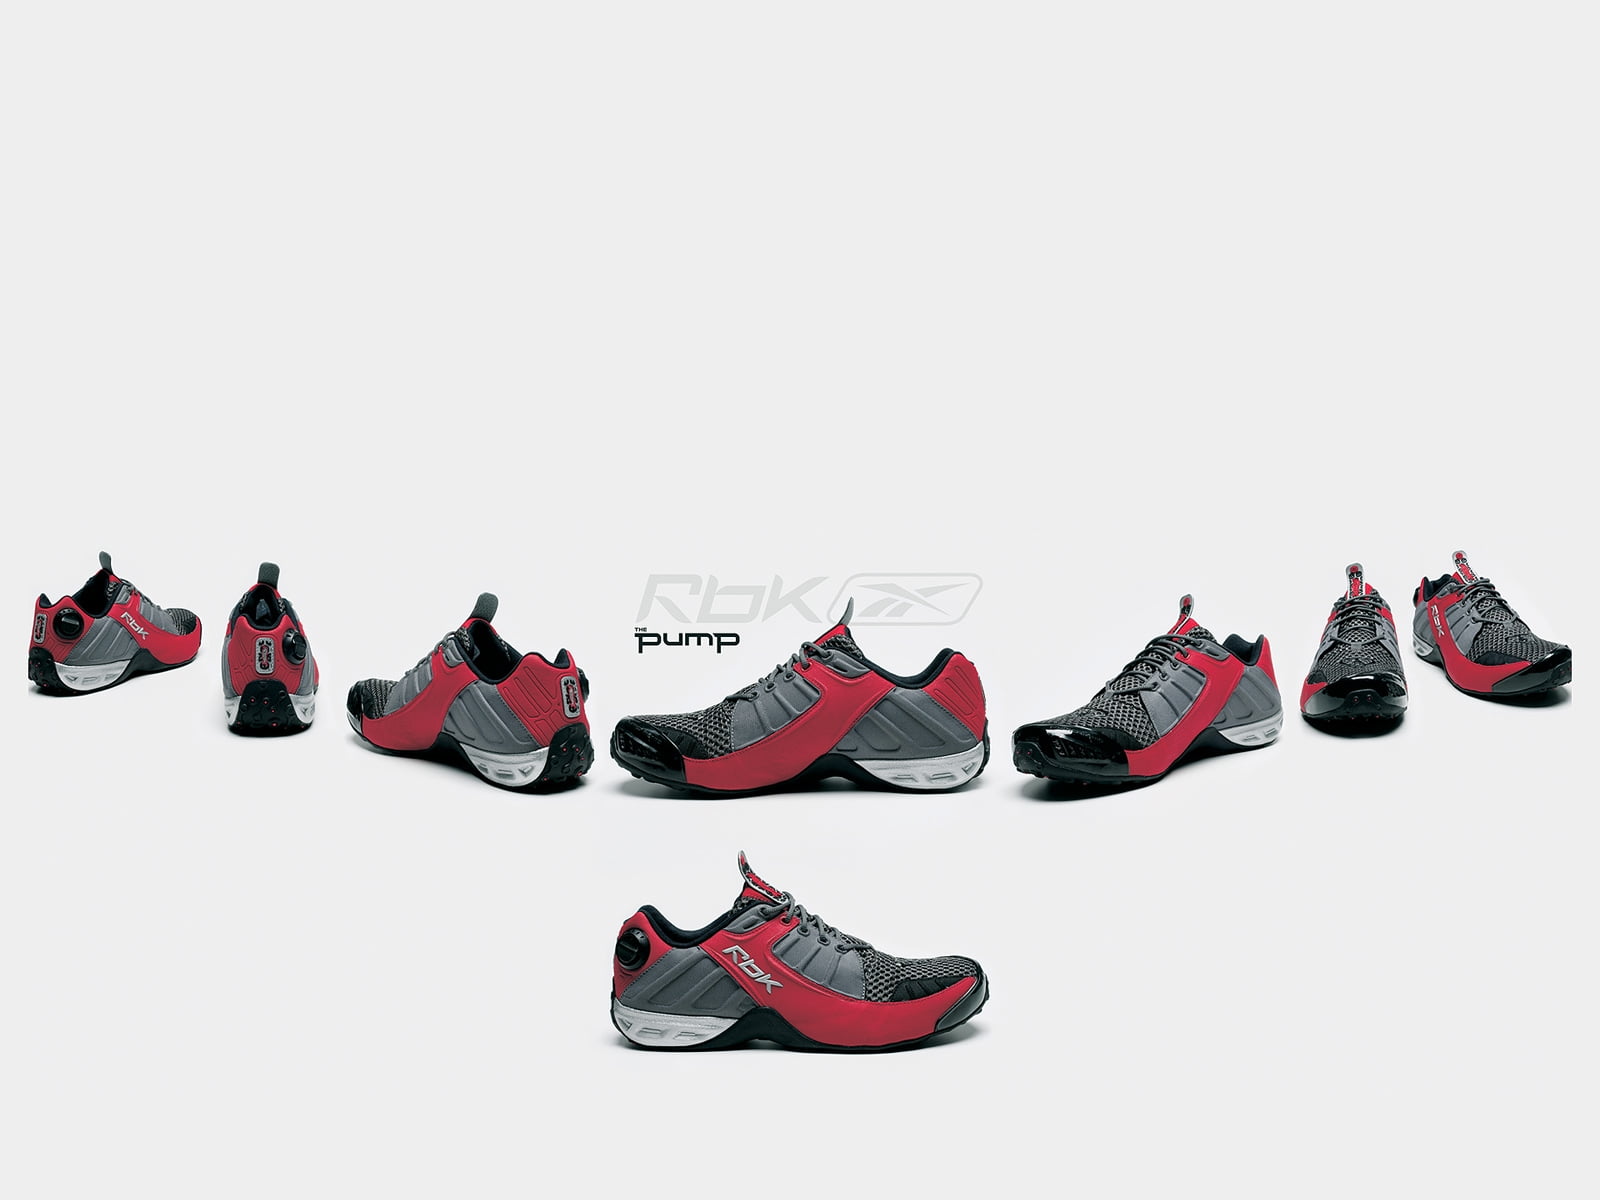 red-and-grey Reebok athletic shoe lot